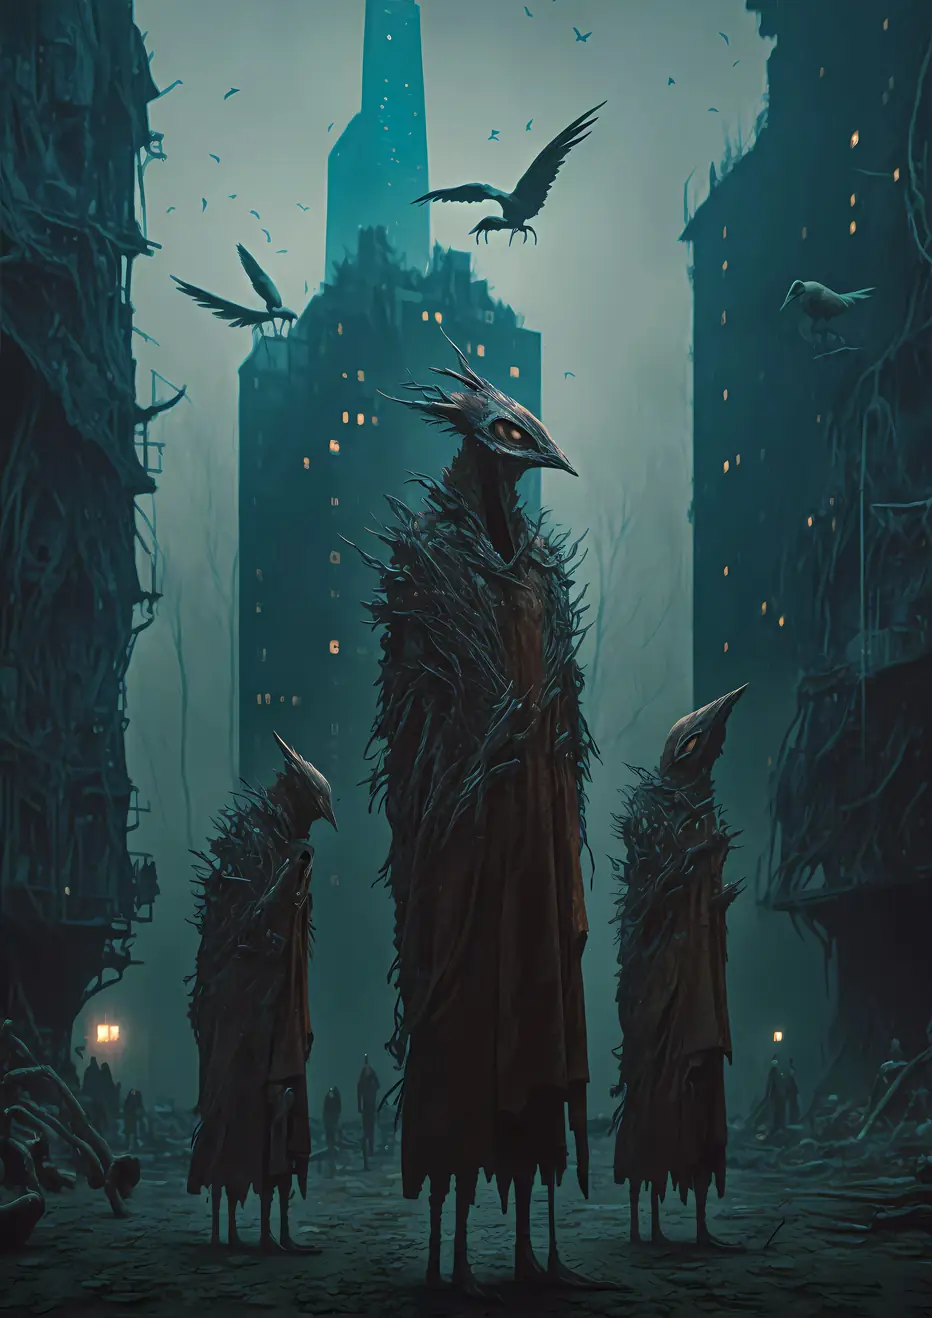 City of Lost Birds - Bird-like beings amidst a dystopian cityscape.